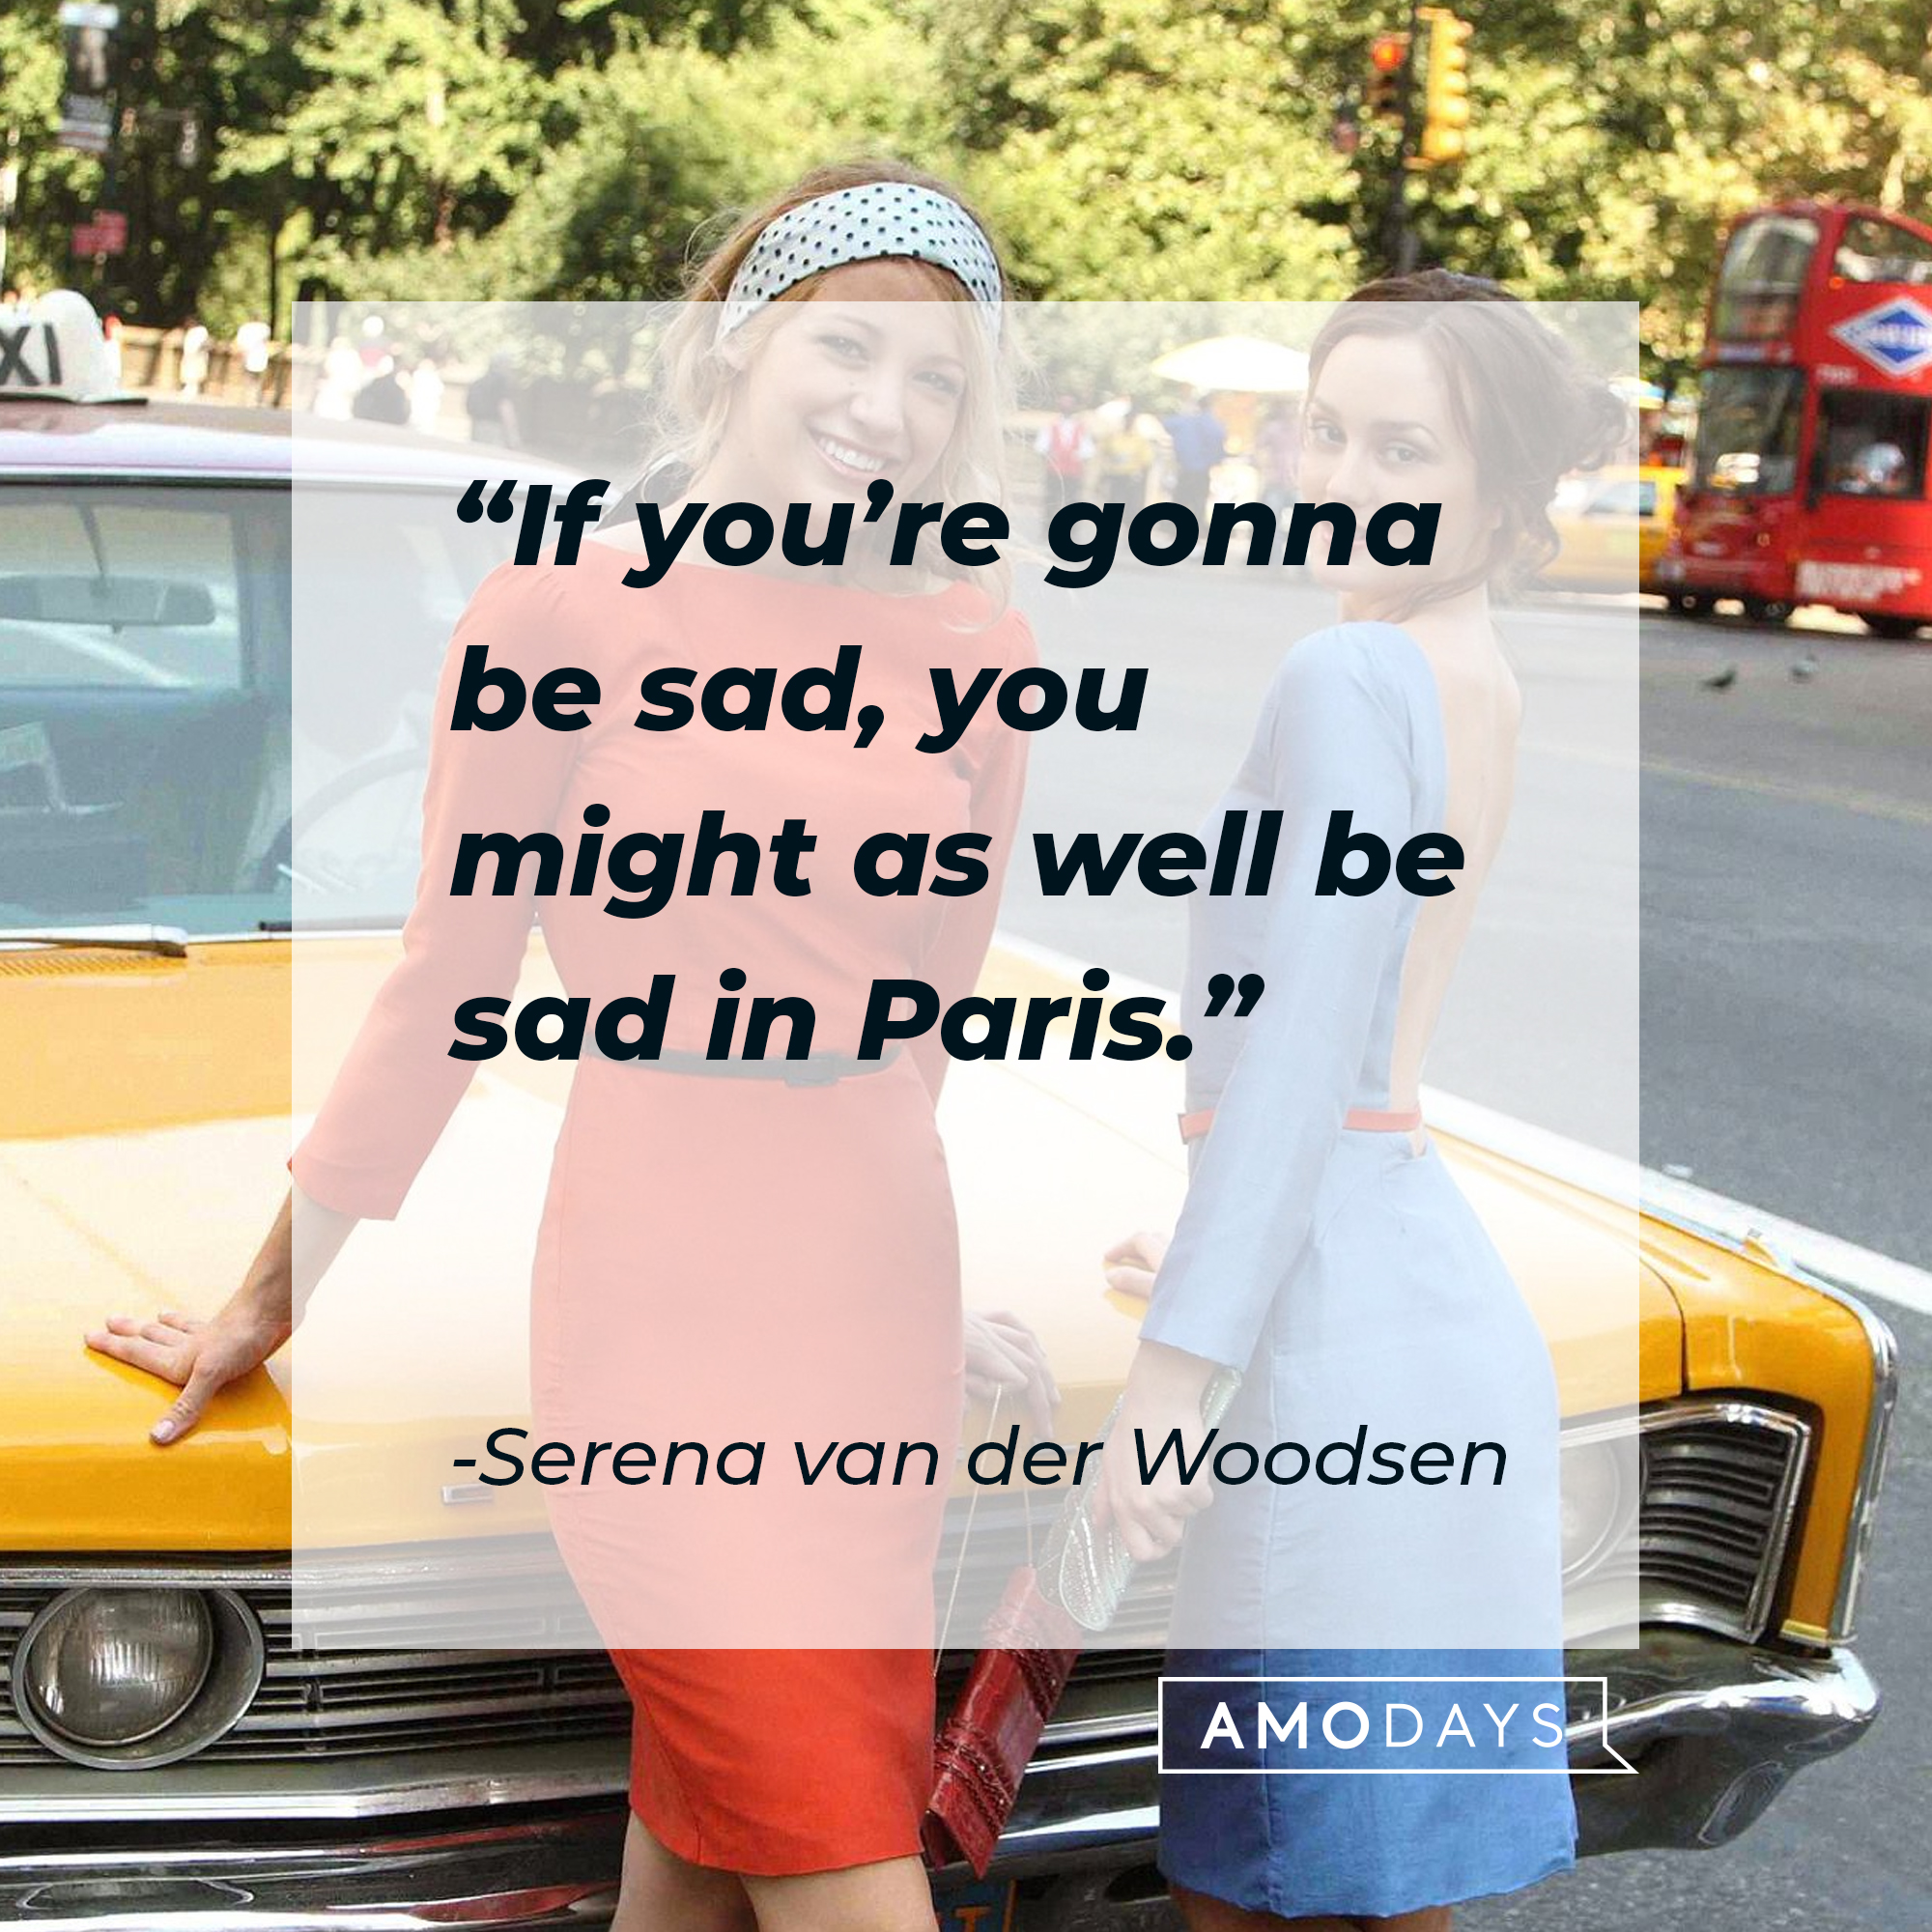 Serena van der Woodsen and Blair Waldorf, with Van der Woodson’s quote: “If you’re gonna be sad, you might as well be sad in Paris.” | Source: Facebook.com/GossipGirl